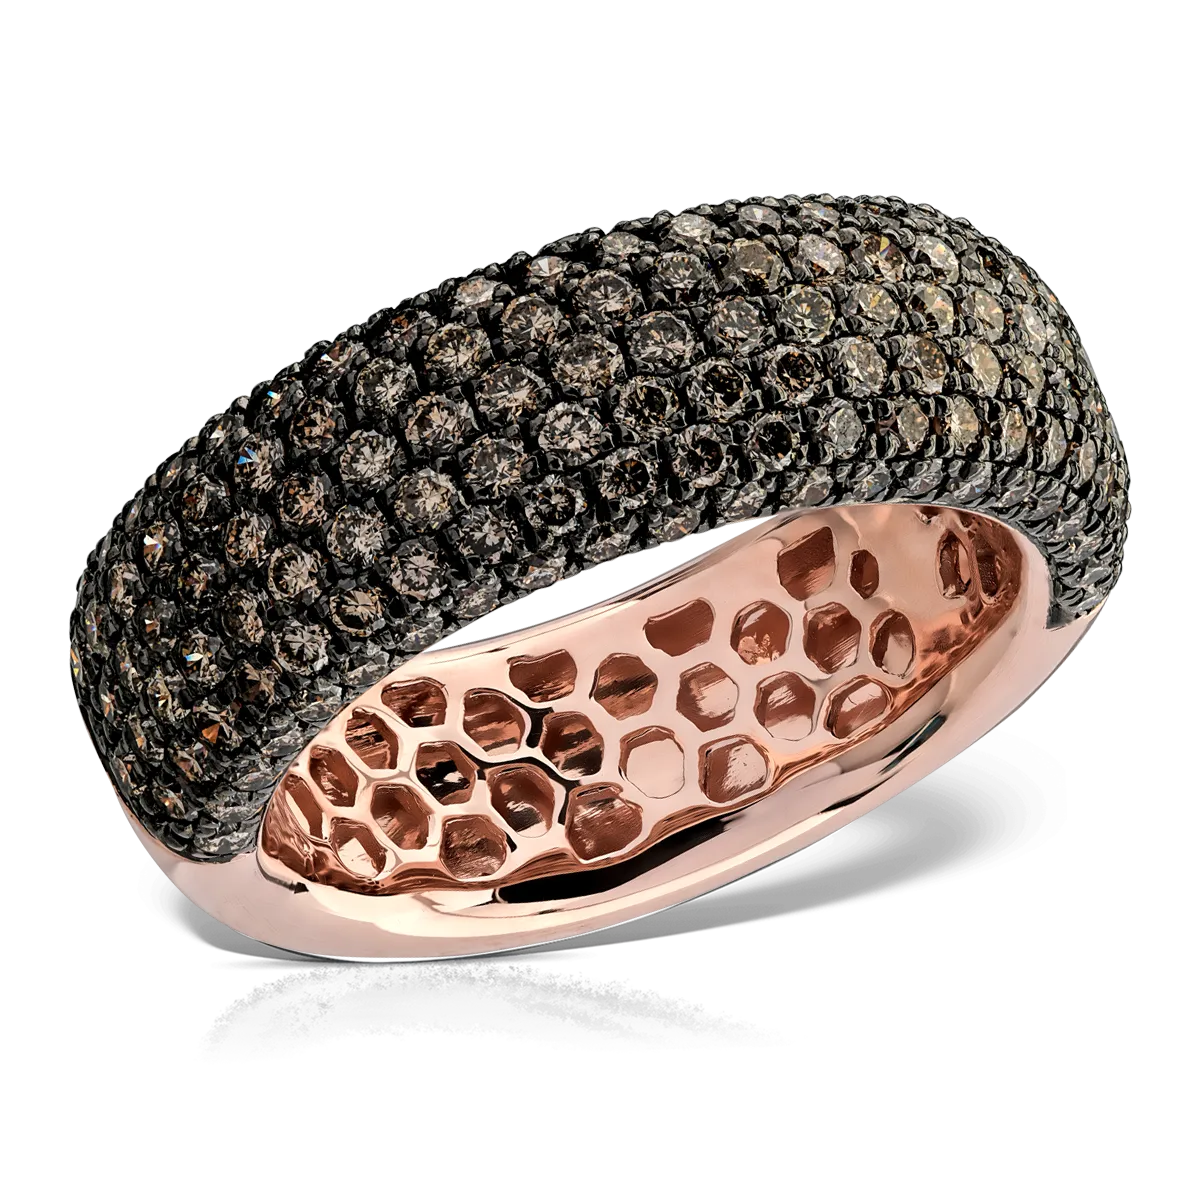 14K rose gold ring with 1.82ct brown diamonds